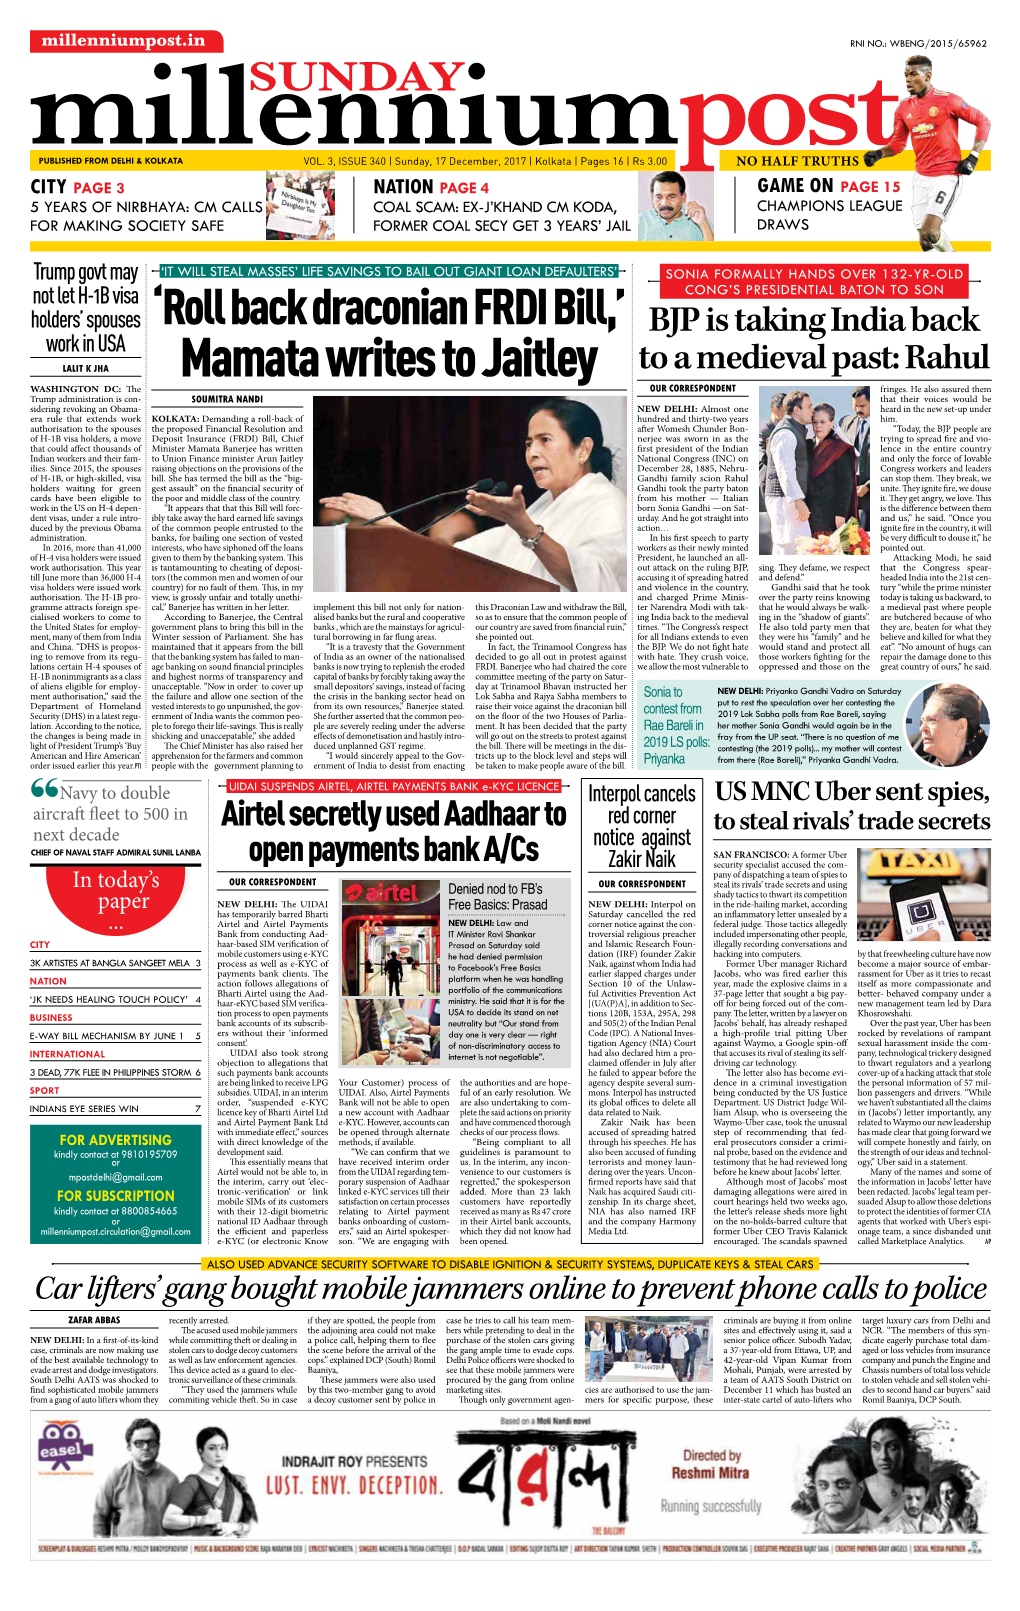 Mamata Writes to Jaitley to a Medieval Past: Rahul WASHINGTON DC: the OUR CORRESPONDENT Fringes